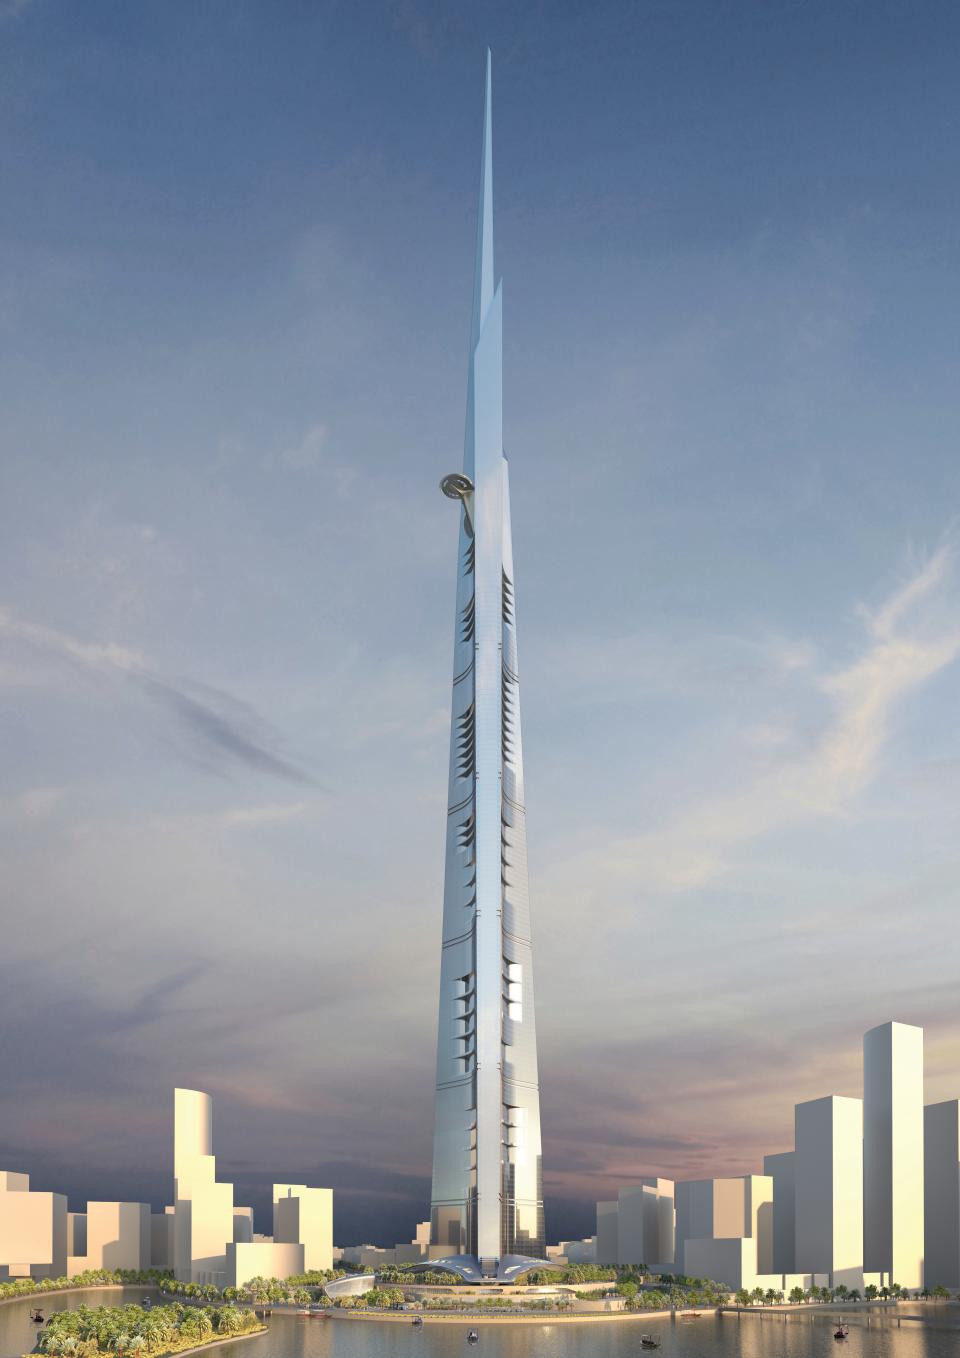 A rendering of Jeddah Tower shows what the supertall will look like when complete.